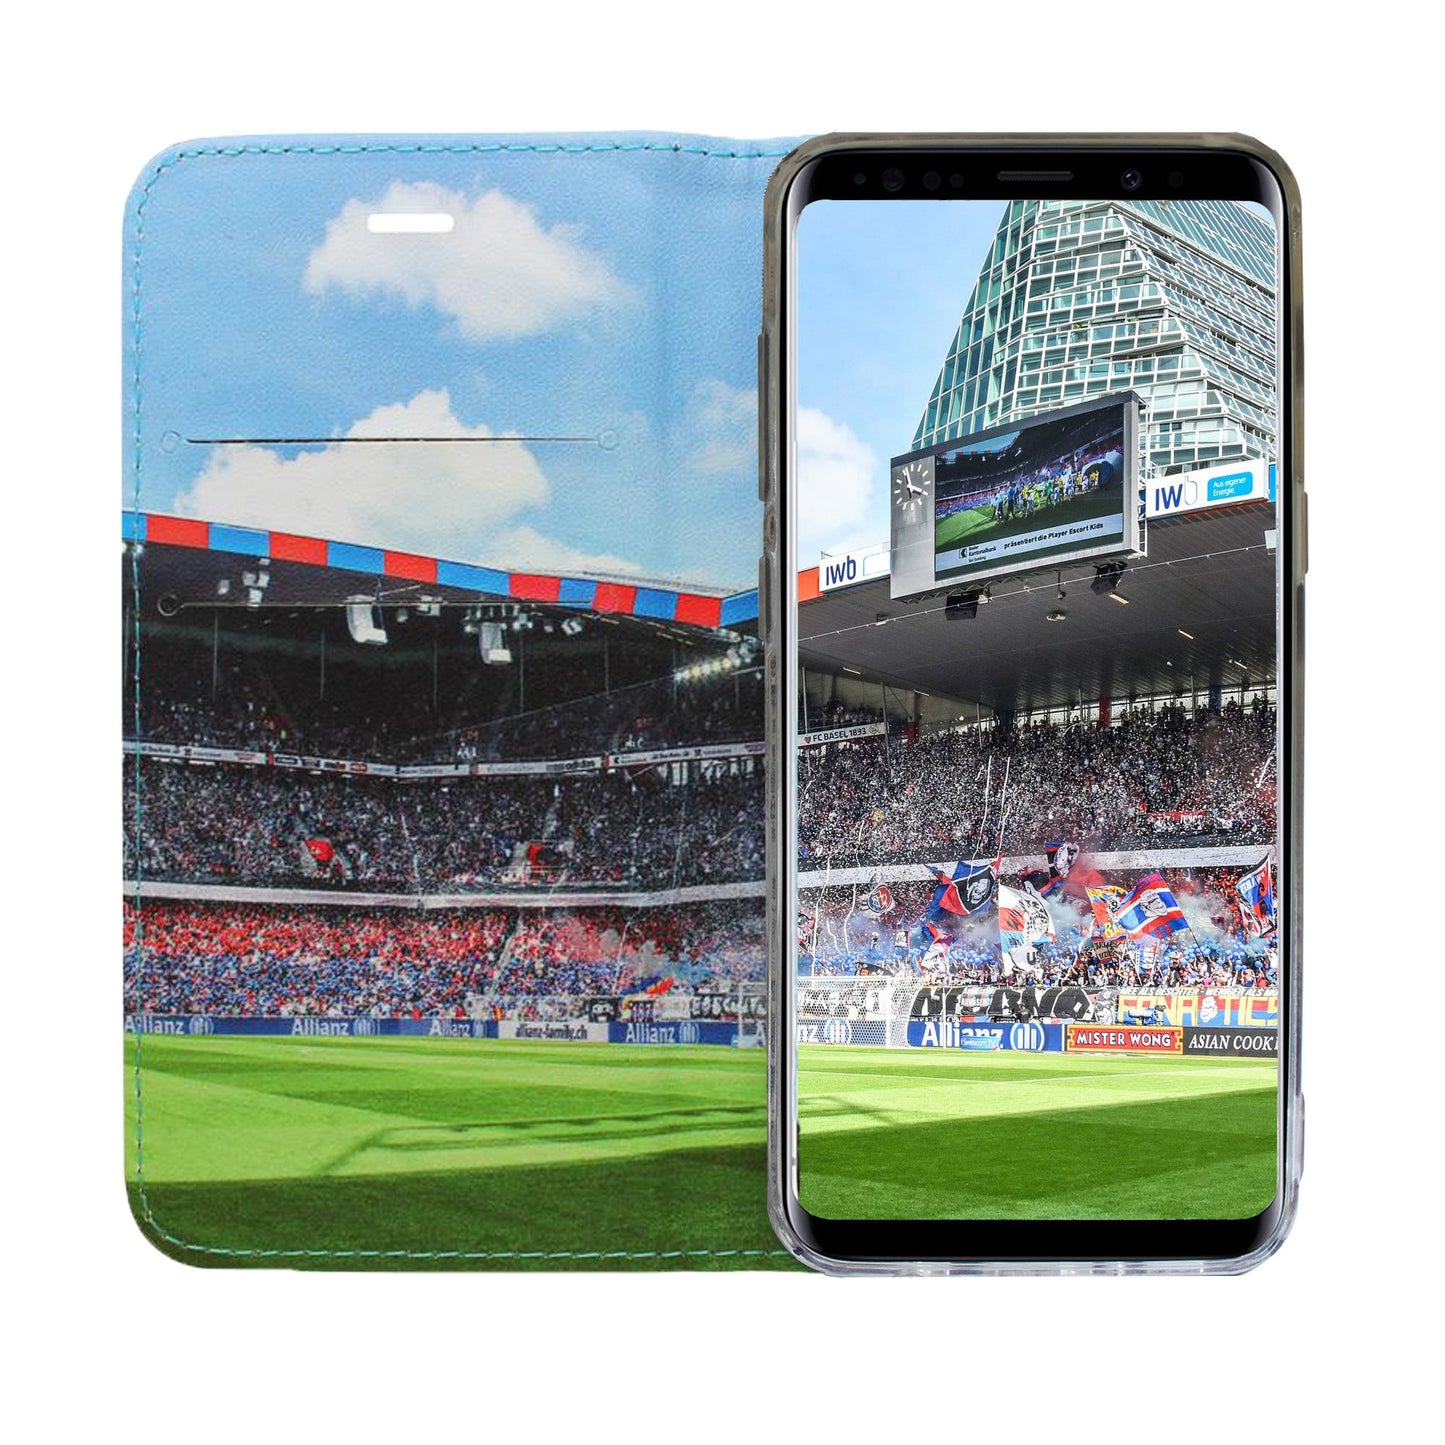 FCB red / blue panoramic case for the Samsung Galaxy S9 Plus